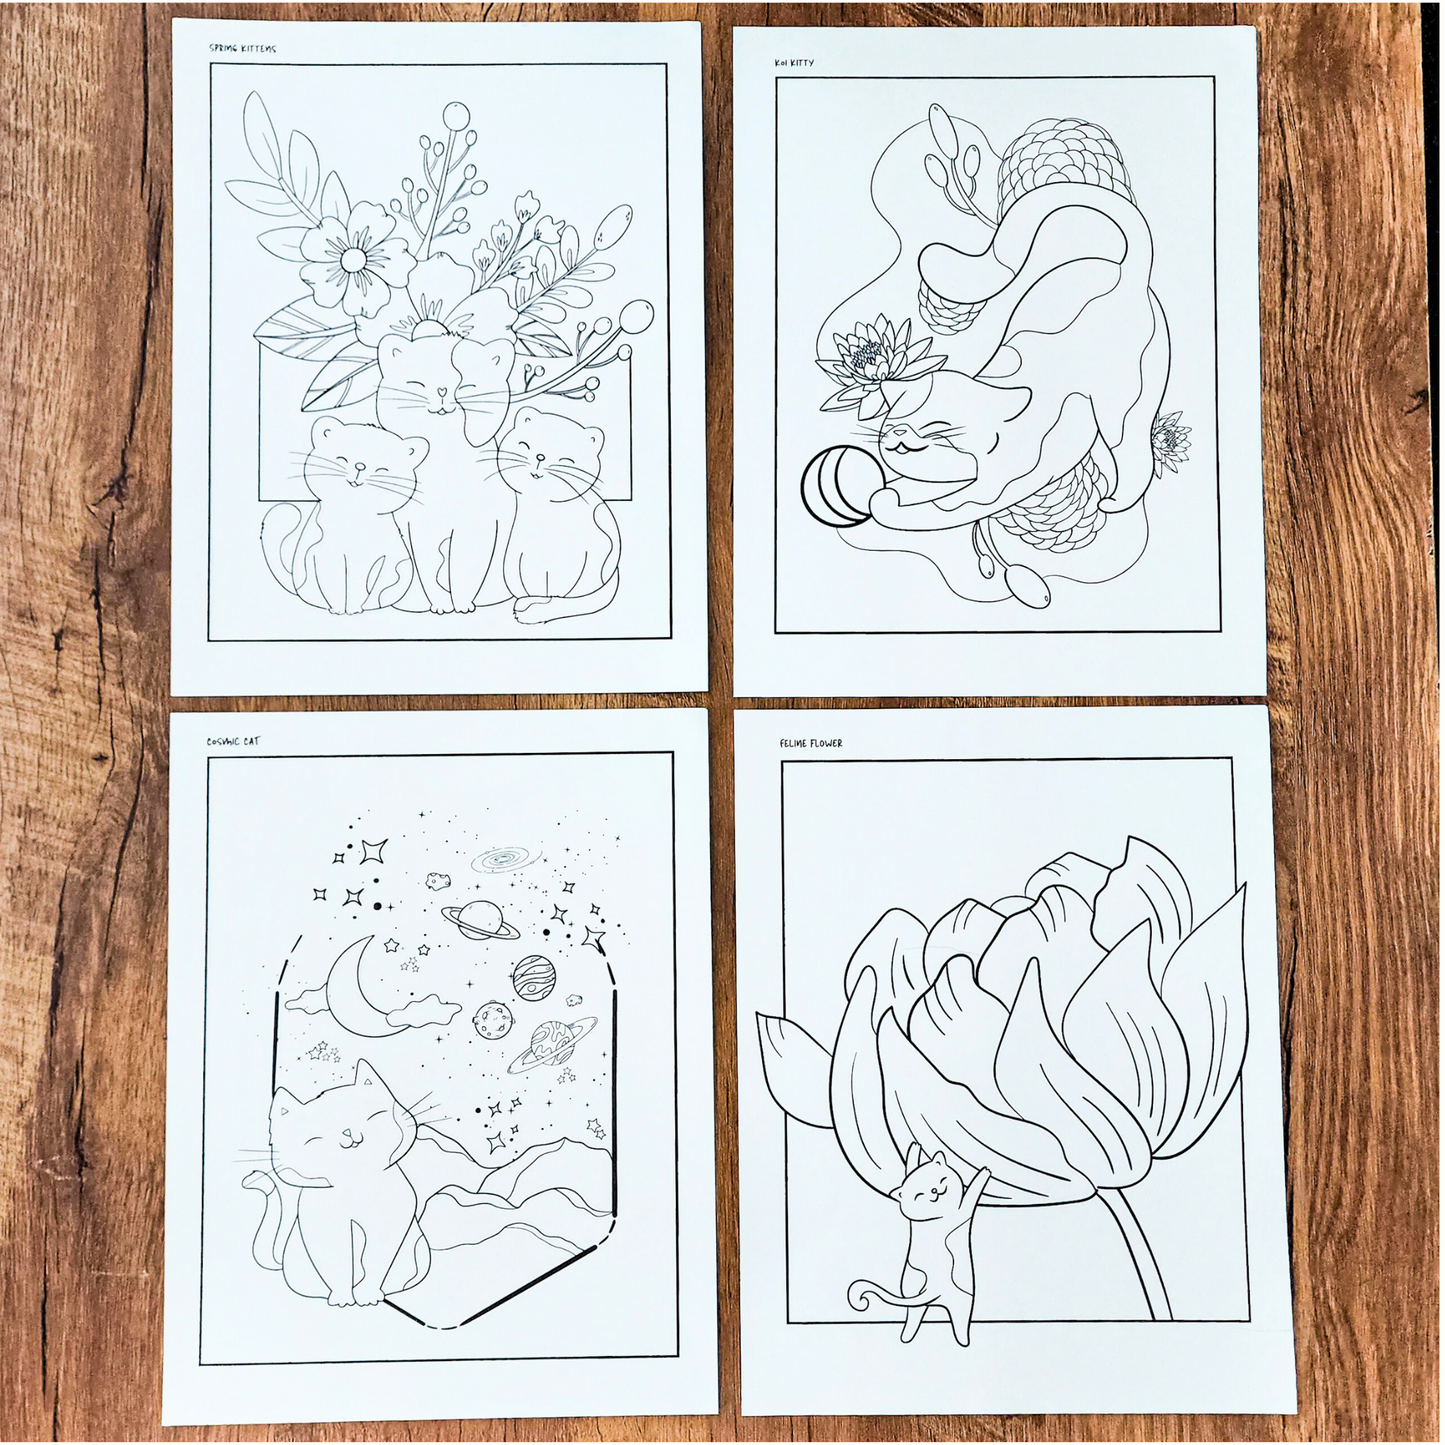 Bambi's Coloring Sheets - Physical Product